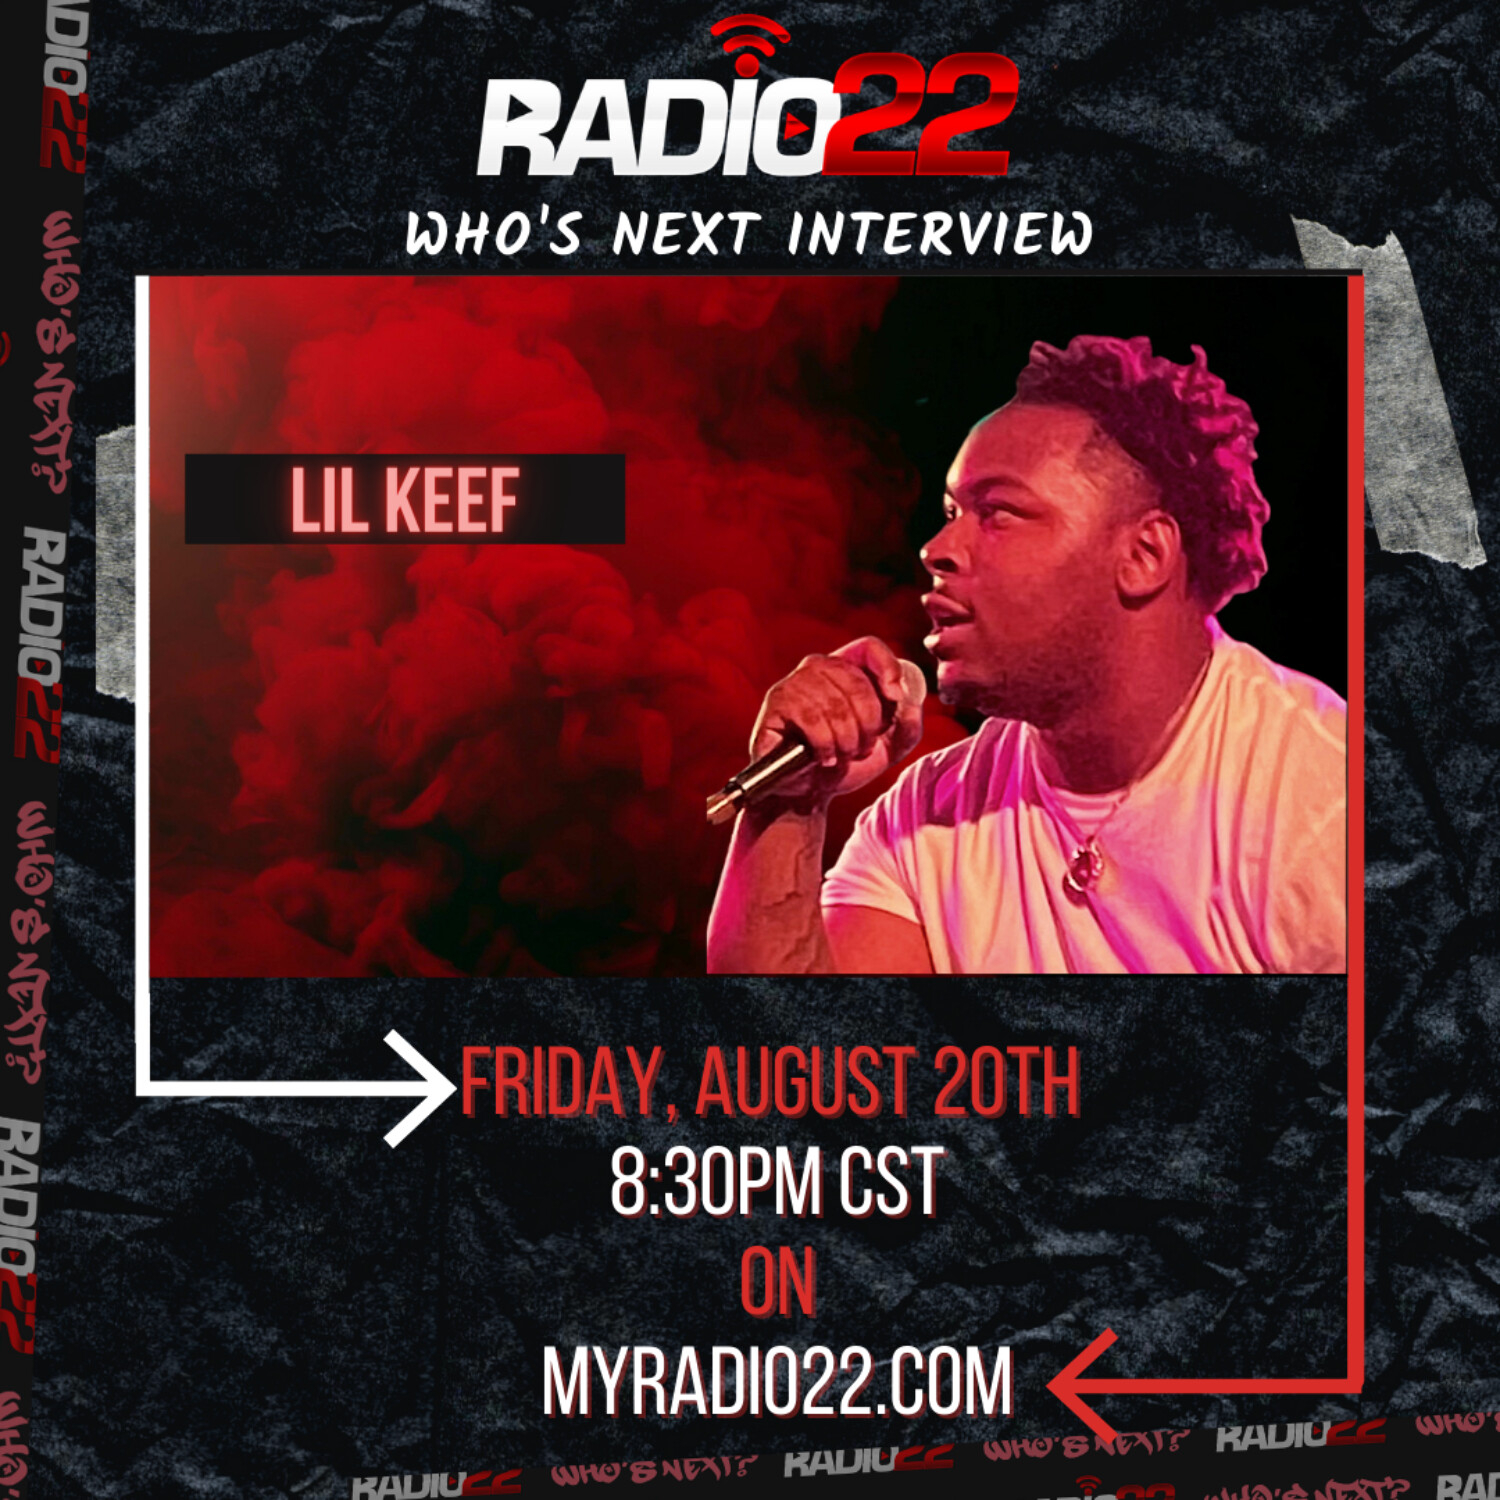 Who’s Next: Lil Keef Interview